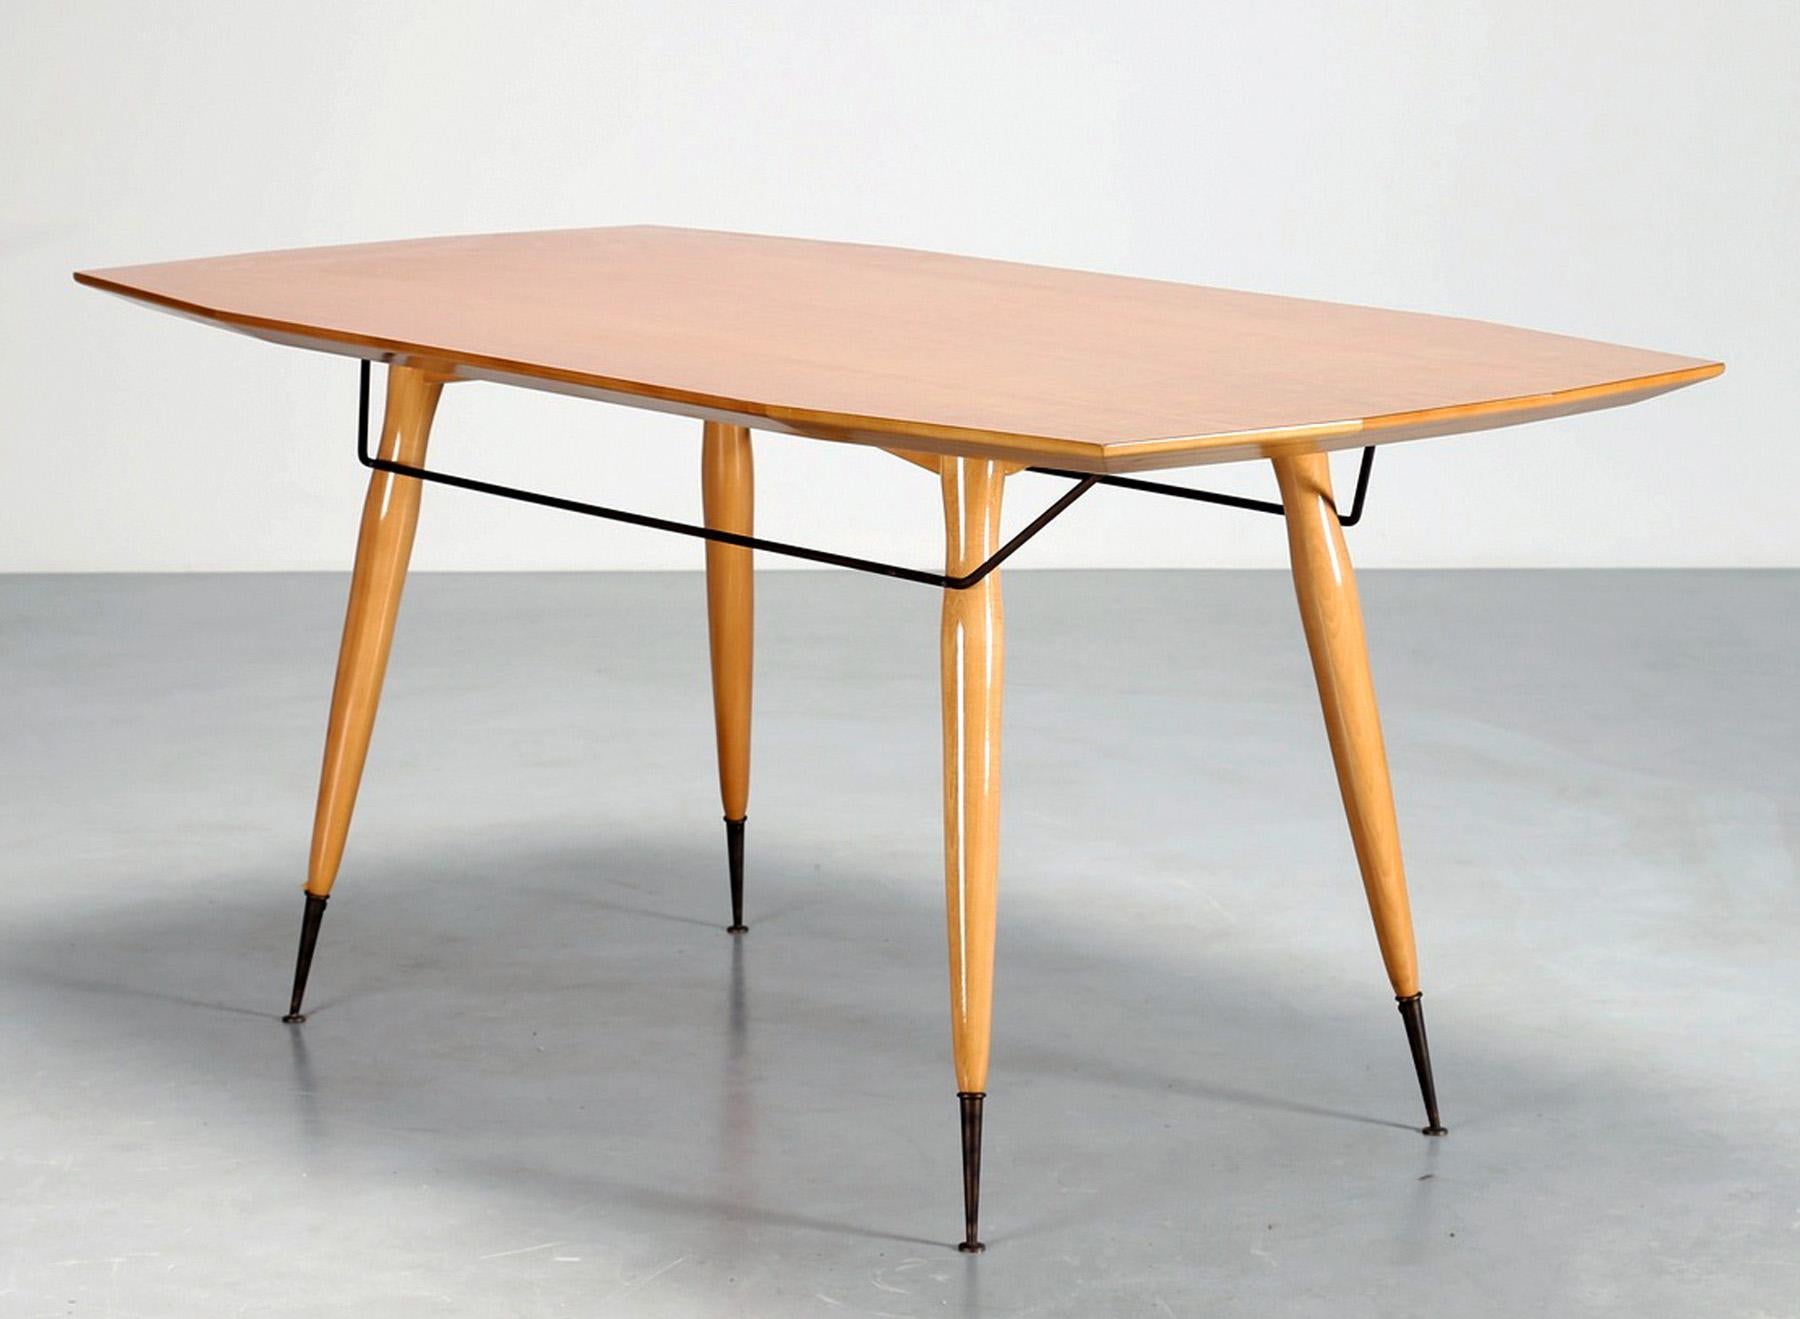 Amazing Italian dining table in maple of the 1950s, characterized by a unique sculptured design, very stylish and charming.
Its seductive structure, very thin and slight, is unexpectedly and incredibly very solid, balanced and stable.
It’s in very